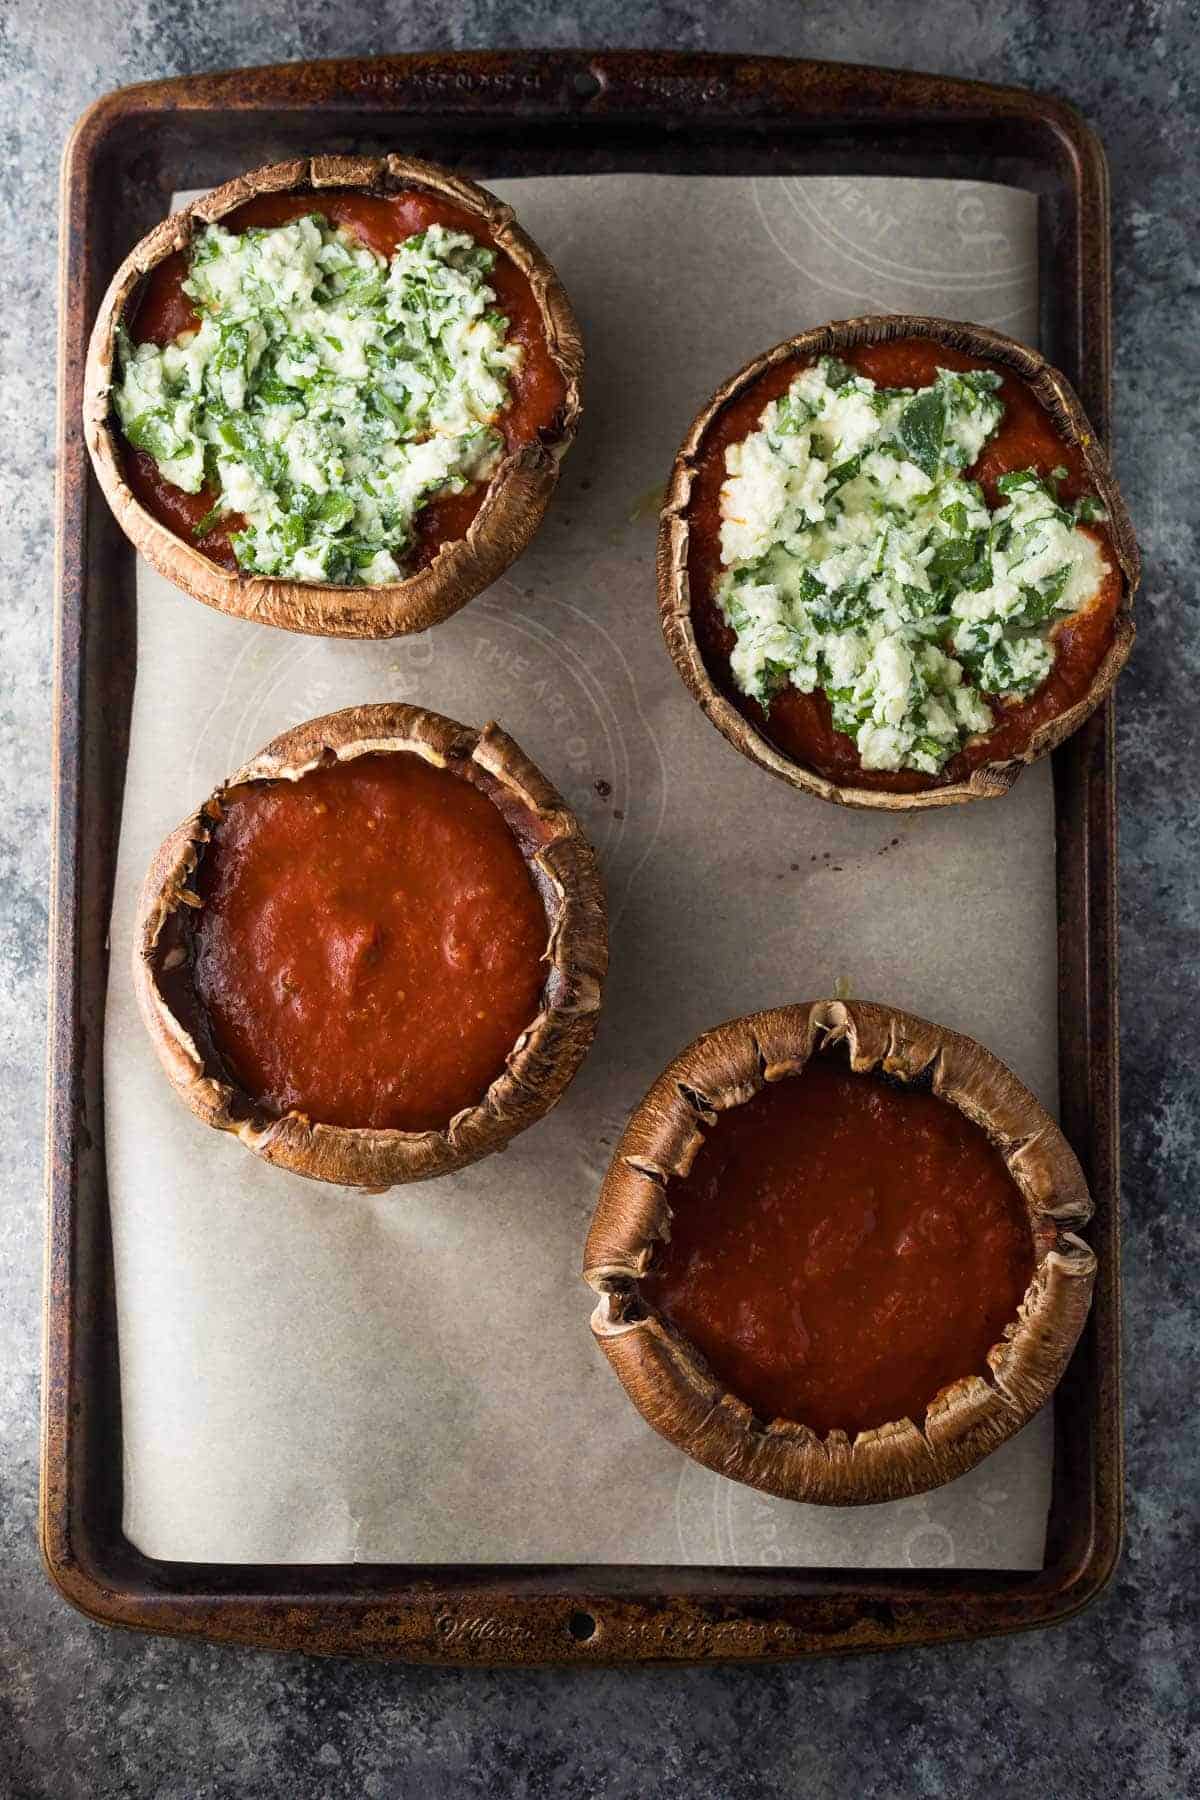 four portobello mushroom caps stuffed with tomato sauce and toppings on baking tray